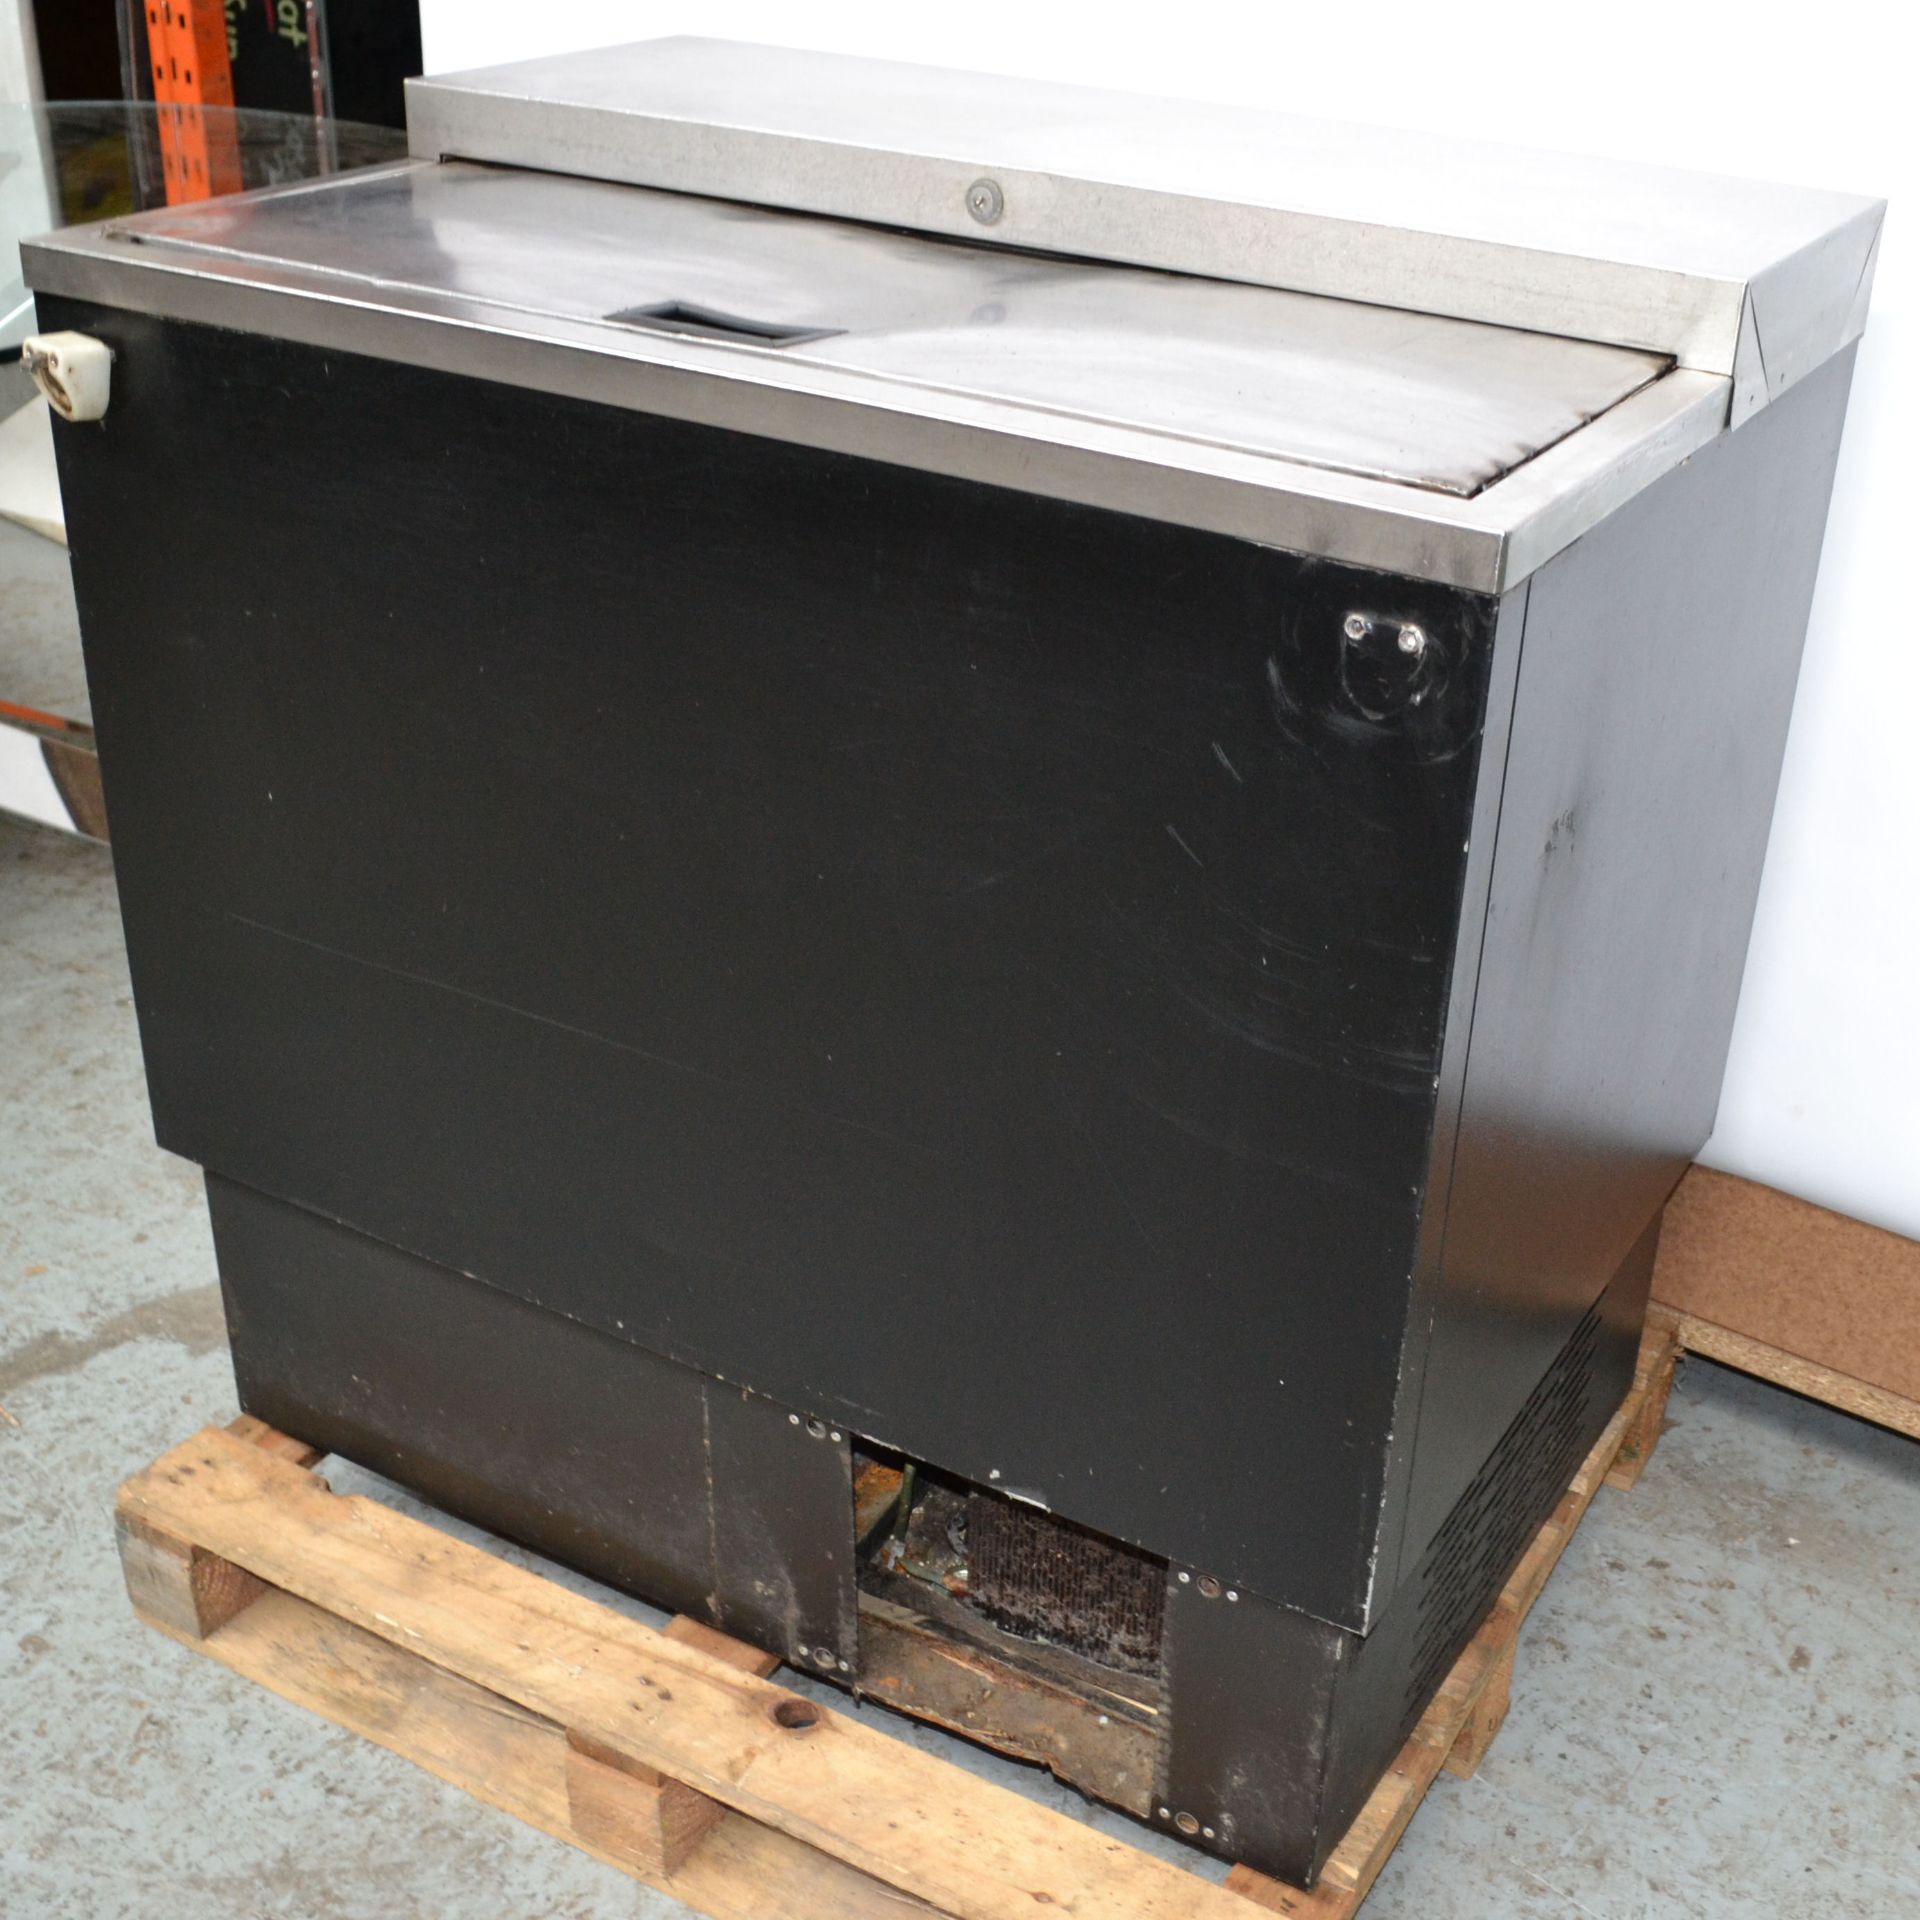 1 x IMC BK90 Series 2 Top Loading Bottle Cooler - Ref :NCE003 - CL007 - Location: Altrincham - Image 3 of 17